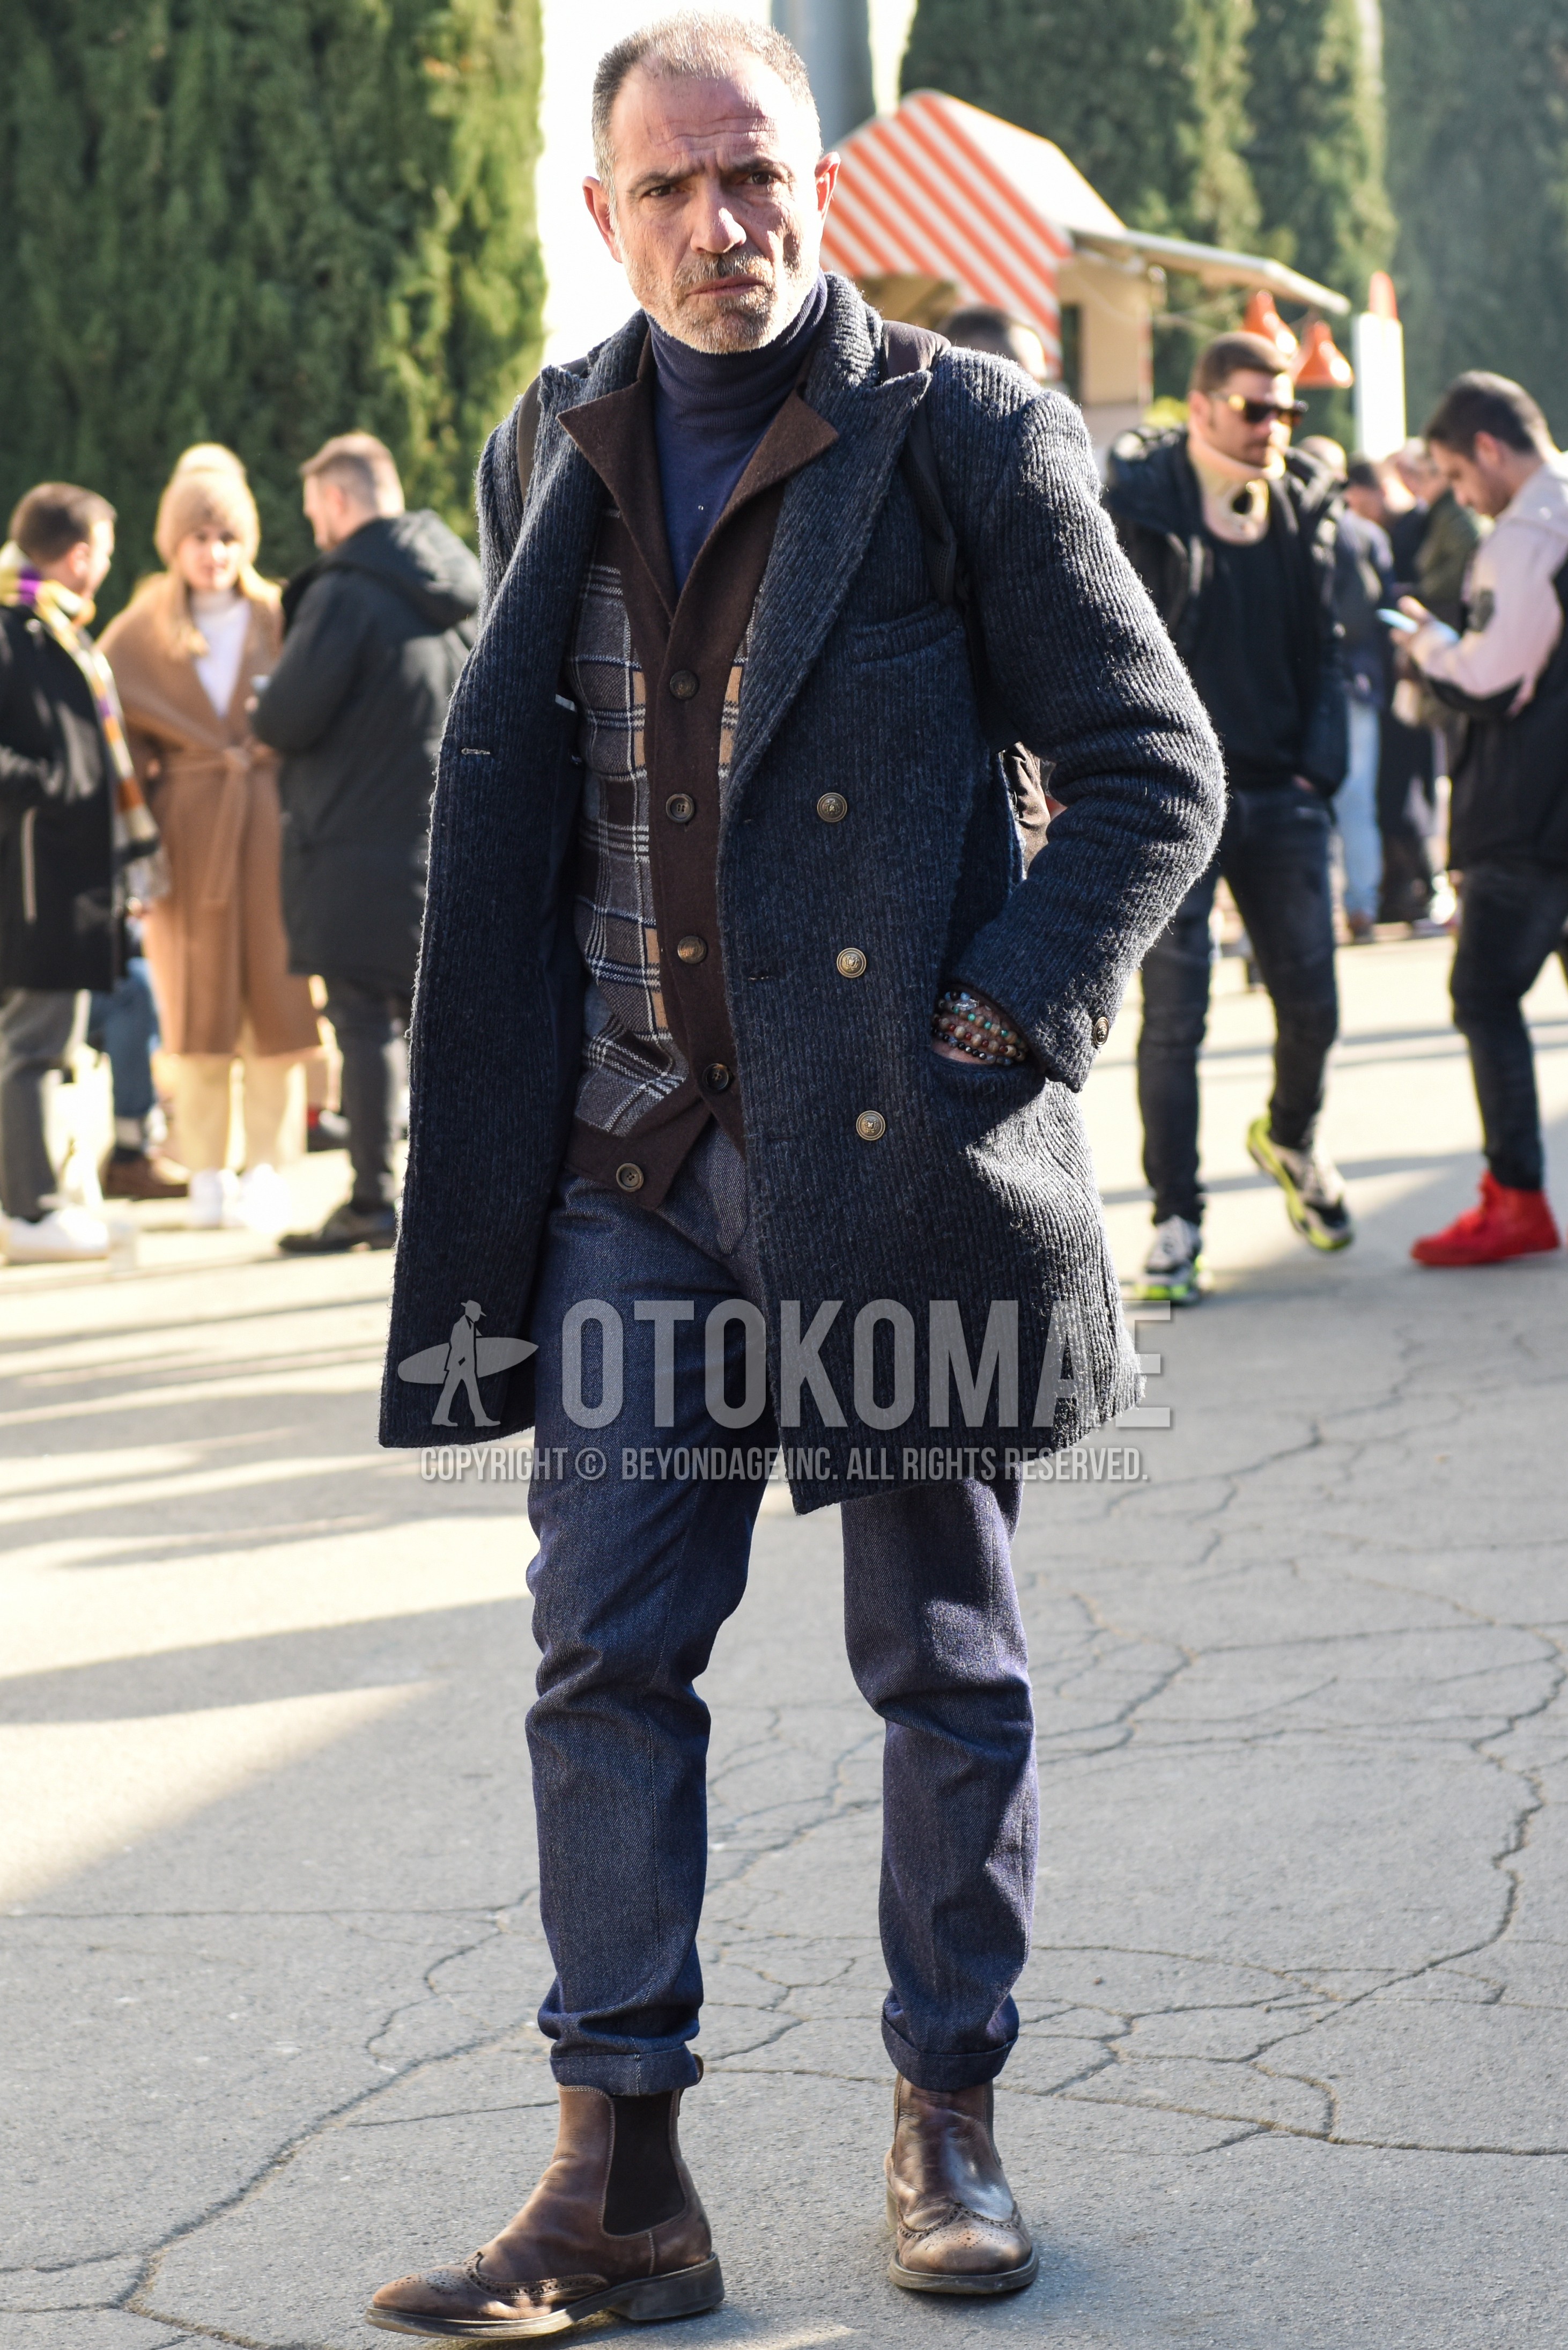 Men's autumn winter outfit with gray plain chester coat, gray brown check cardigan, gray plain turtleneck knit, gray plain slacks, brown side-gore boots.